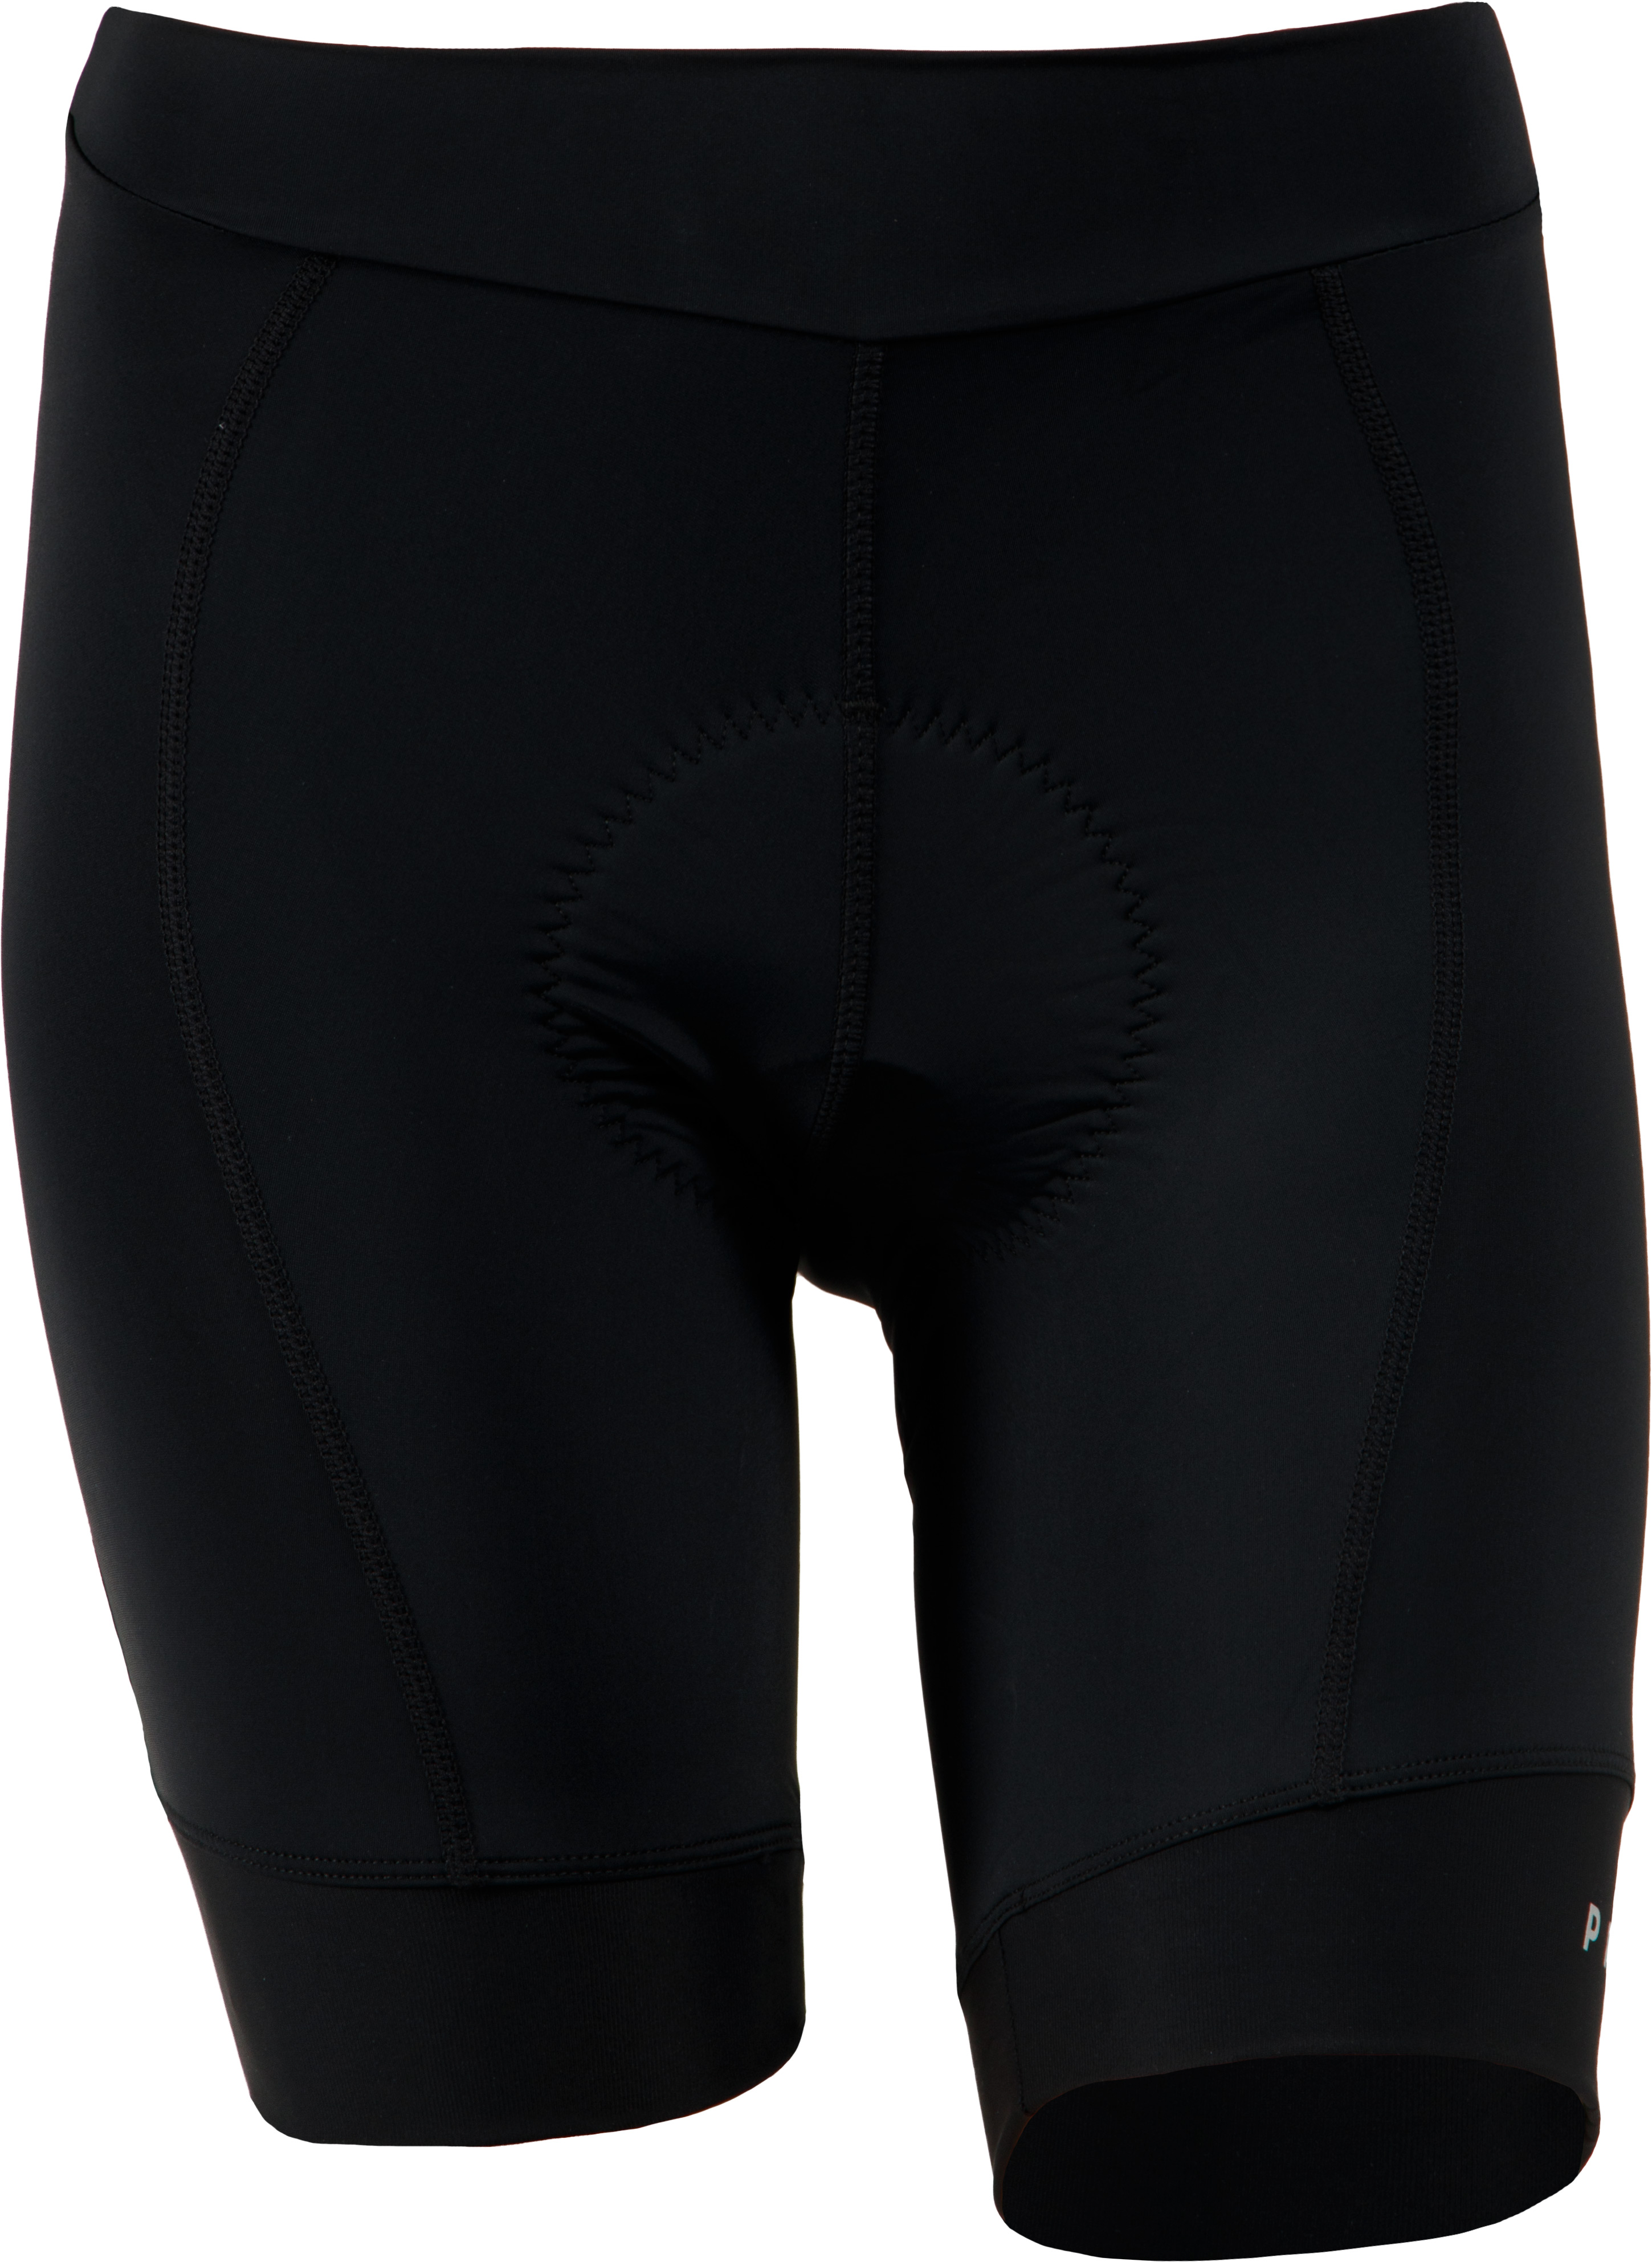 Ladies Pro Elite Cycling Shorts - First Ascent